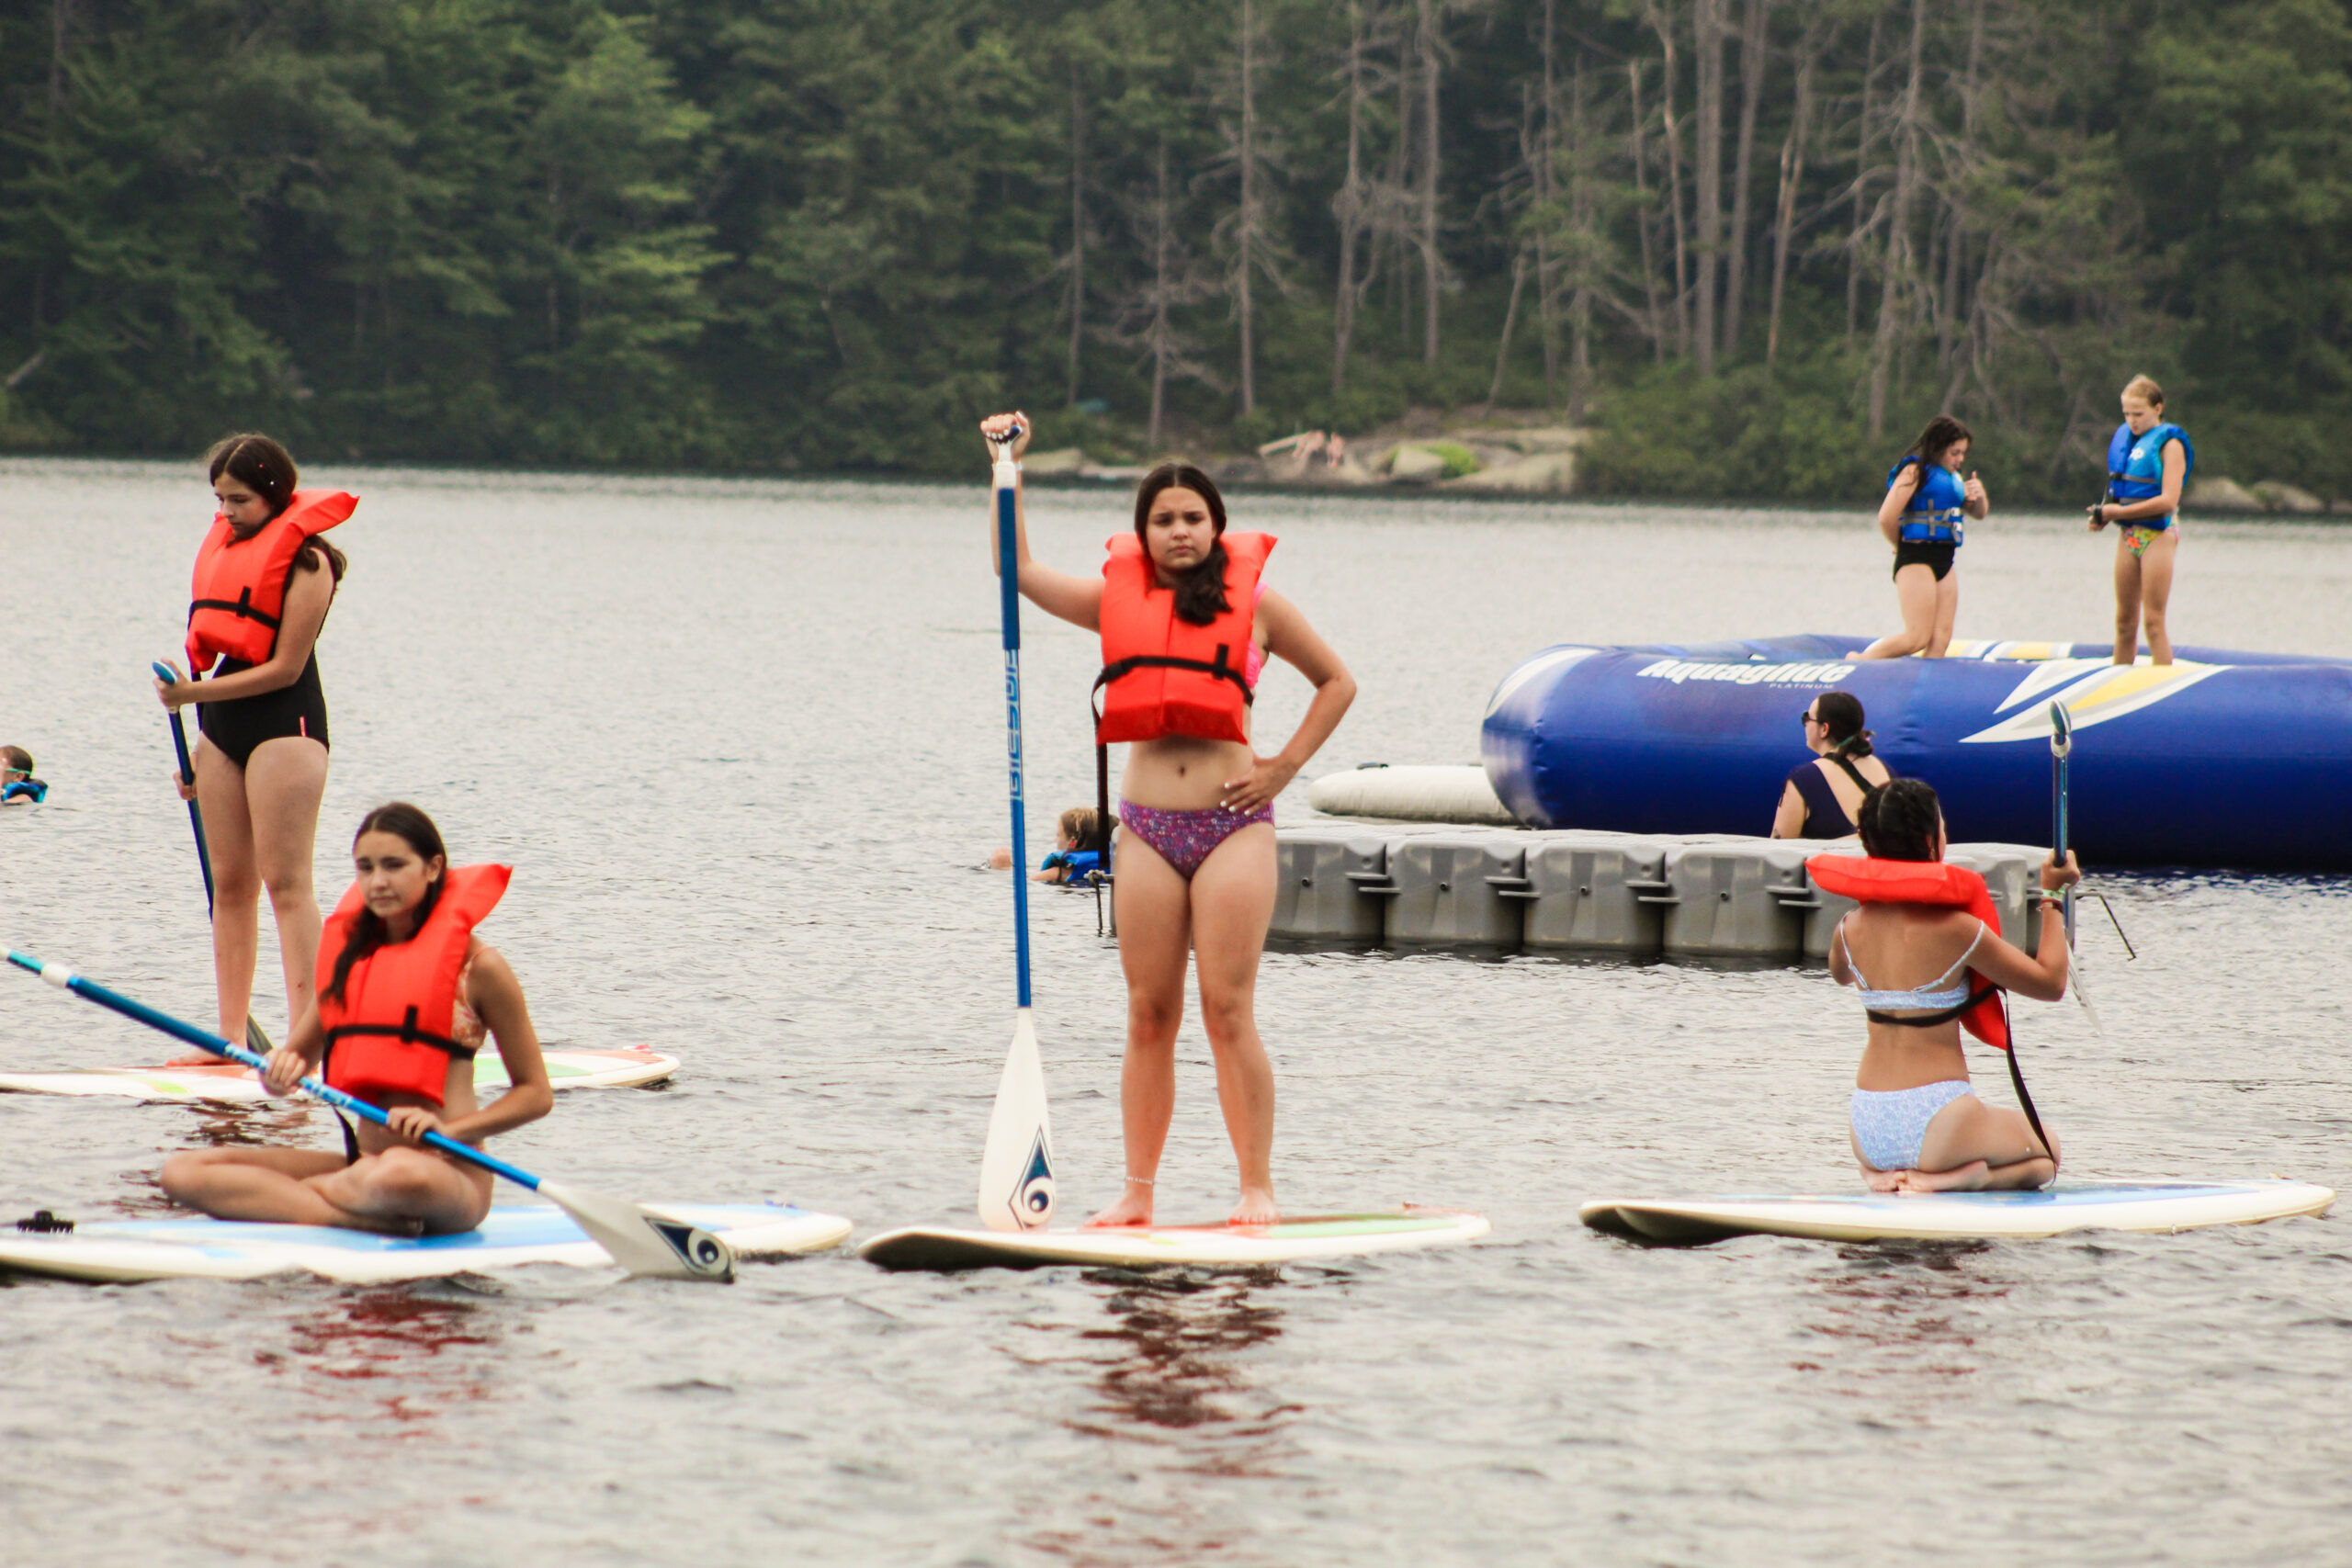 Stand Up Paddle Board at Camp Foss